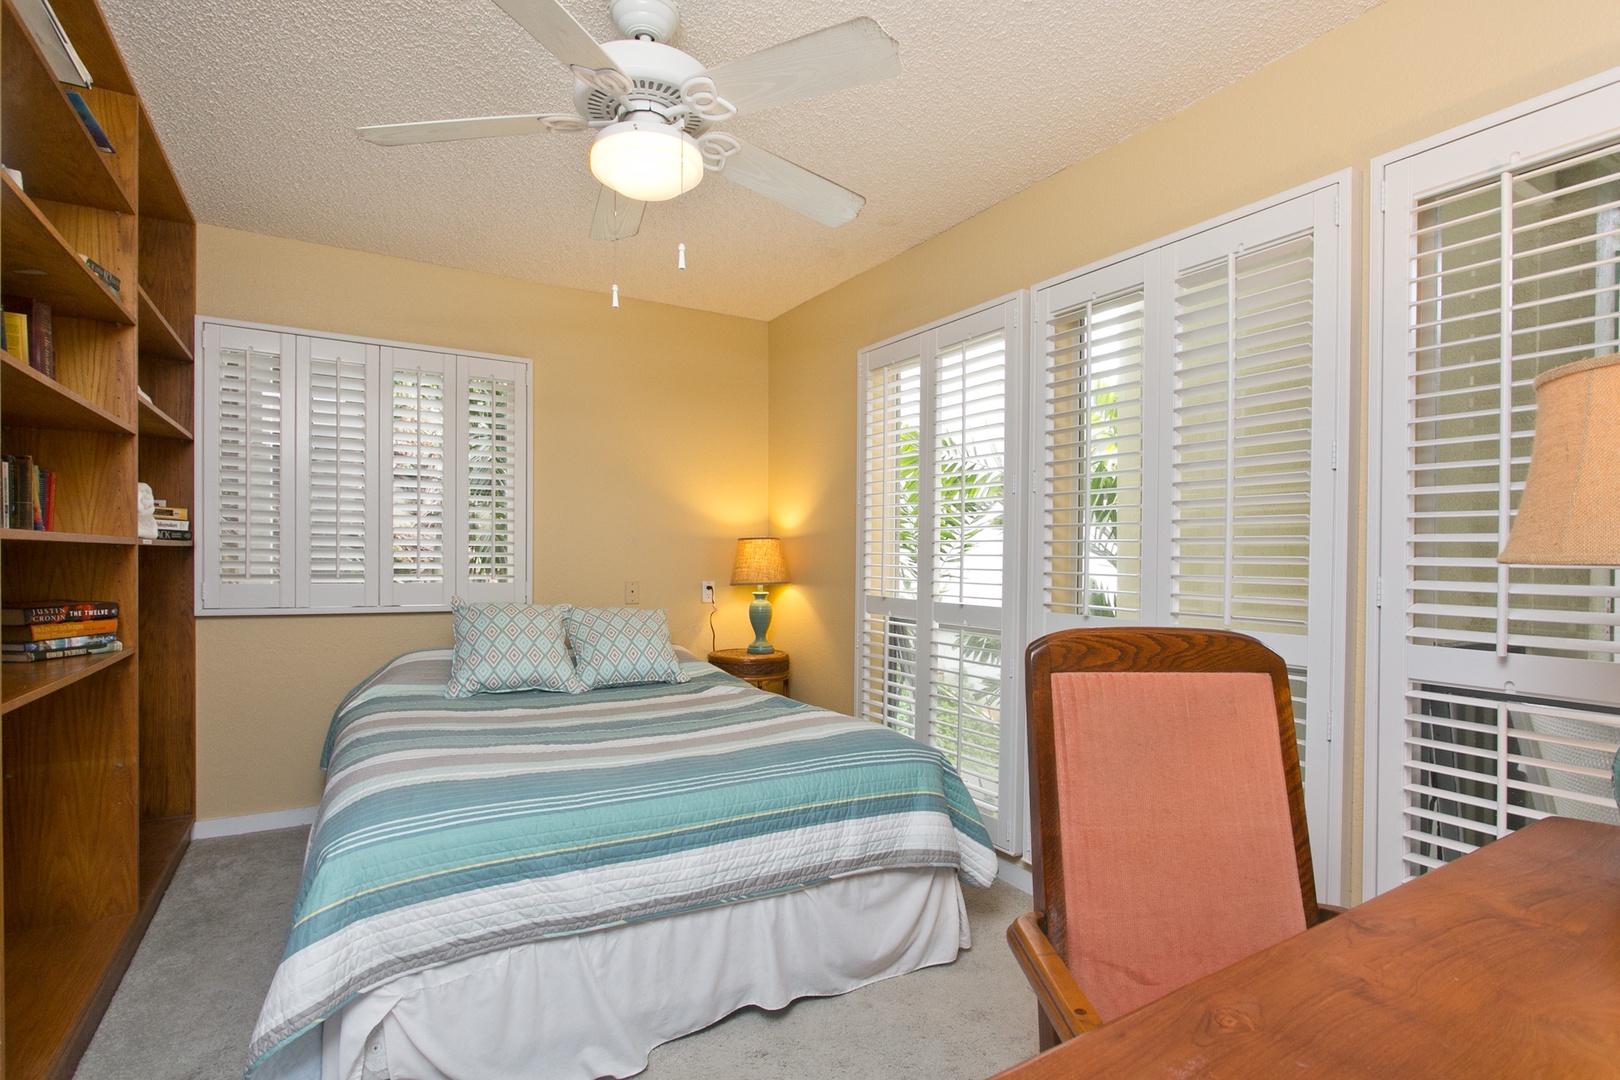 Kailua Vacation Rentals, Lanikai Village* - Hale Kolea: Guest bedroom four with a queen bed, desk area and natural lighting.